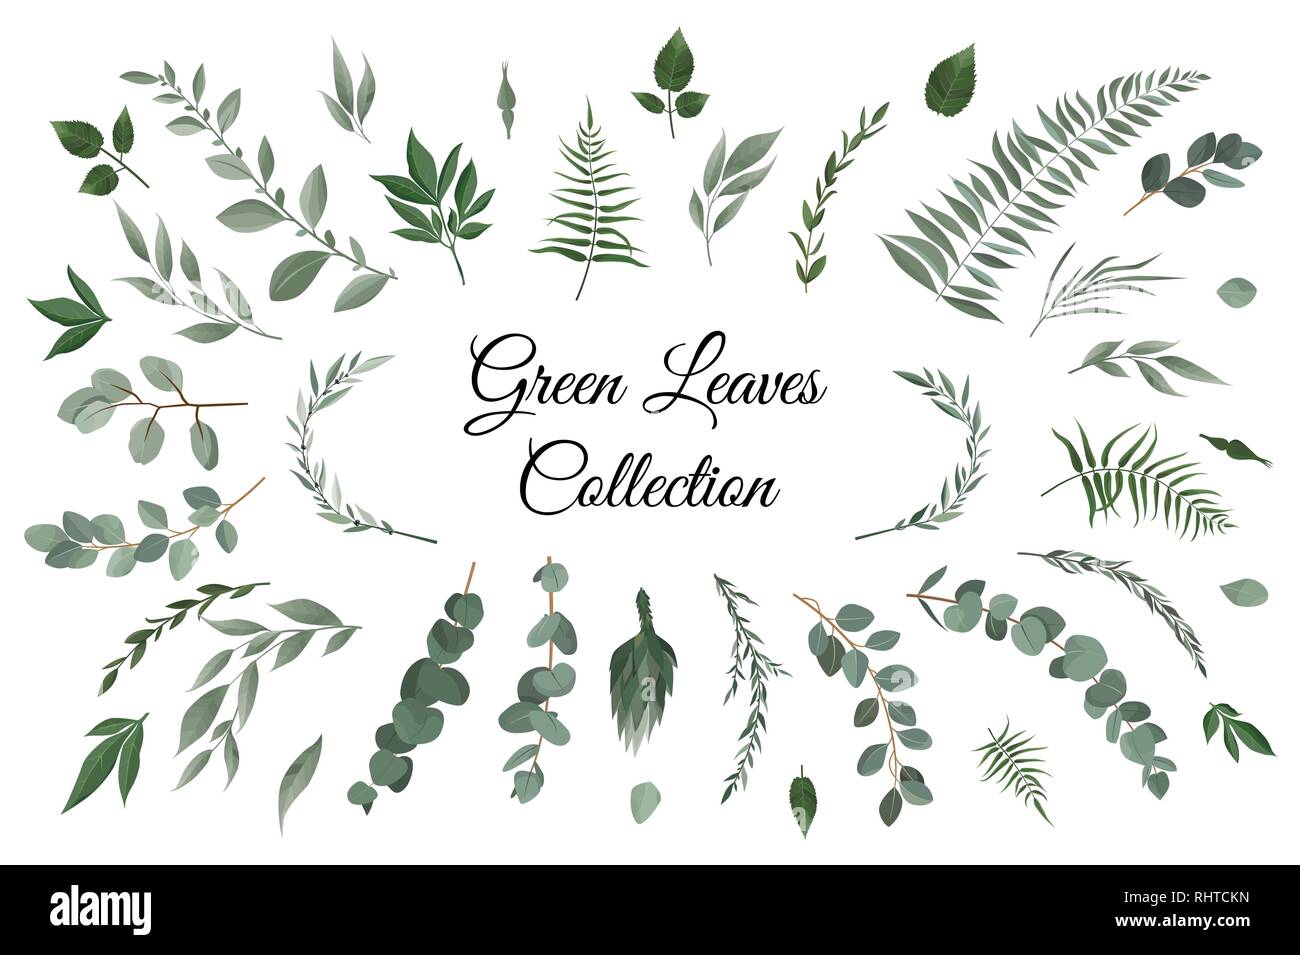 Vector designer elements set collection of greeng leaves herbs in watercolor style. Stock Vector